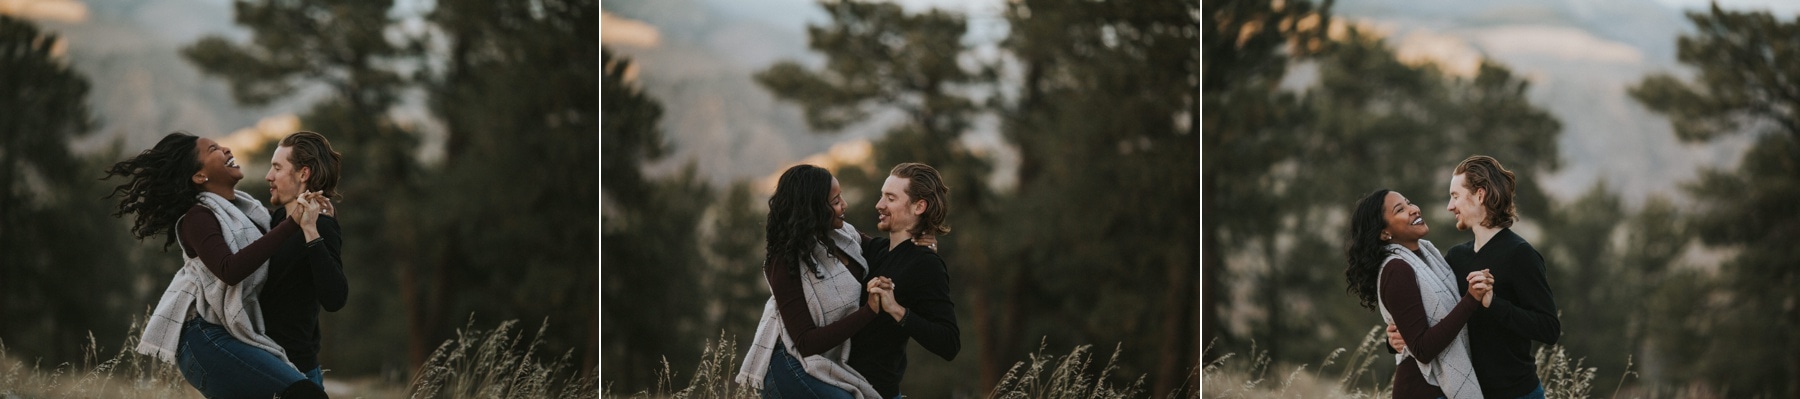 golden engagement photography, golden engagement photographer, lookout mountain engagement, texans in colorado, winter engagement, golden winter engagement, laughter during engagement session, candid engagement photos